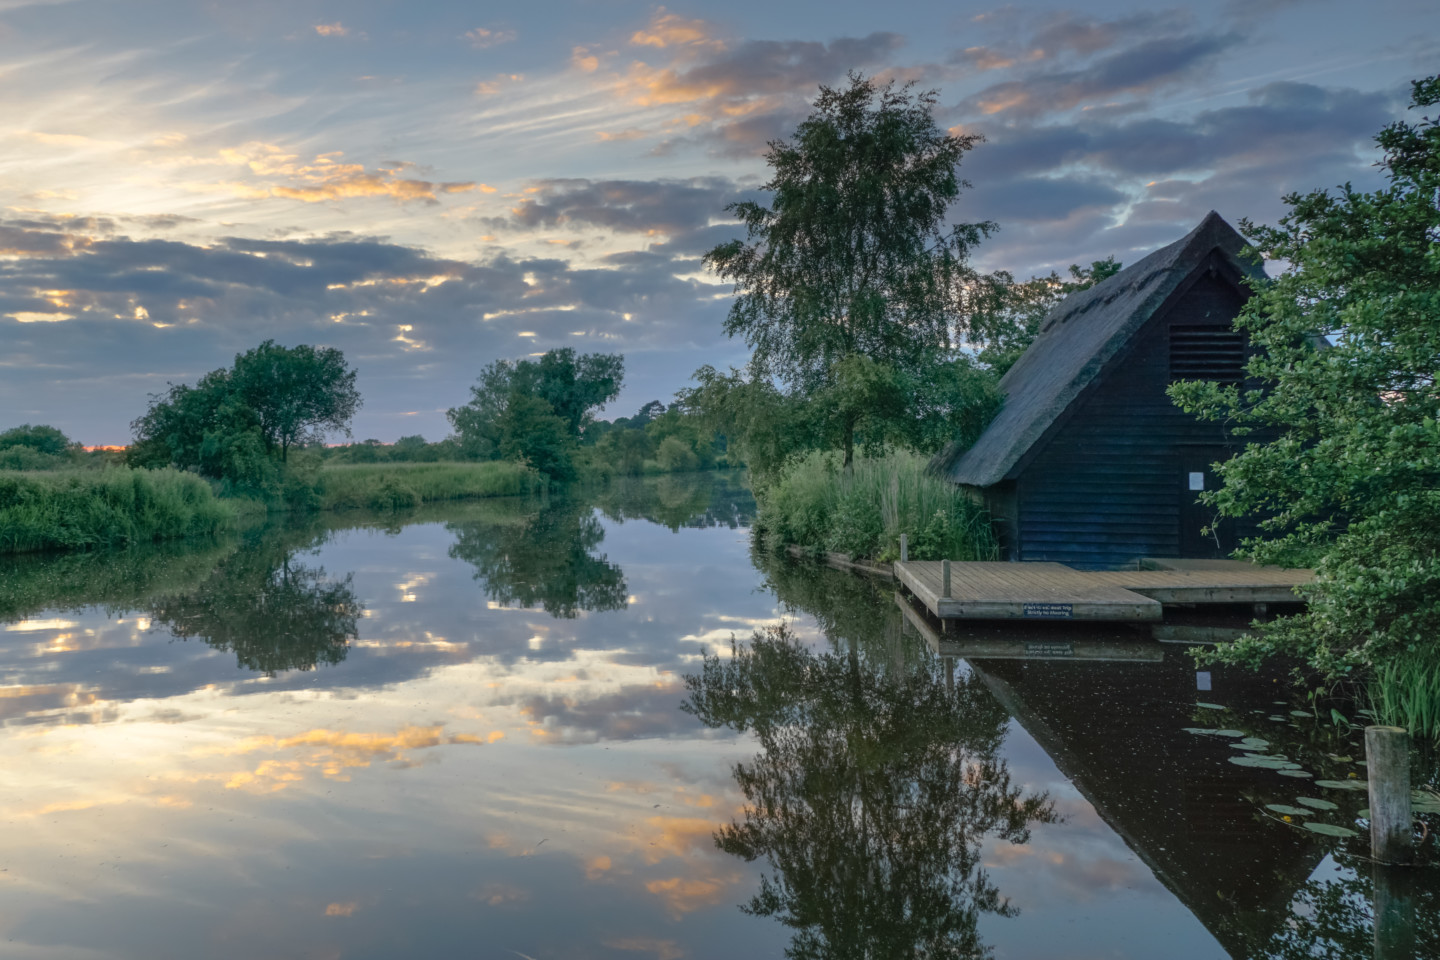 Reflections of the sky and thatched boatshed in the still water of the River Ant, by Chris Hill